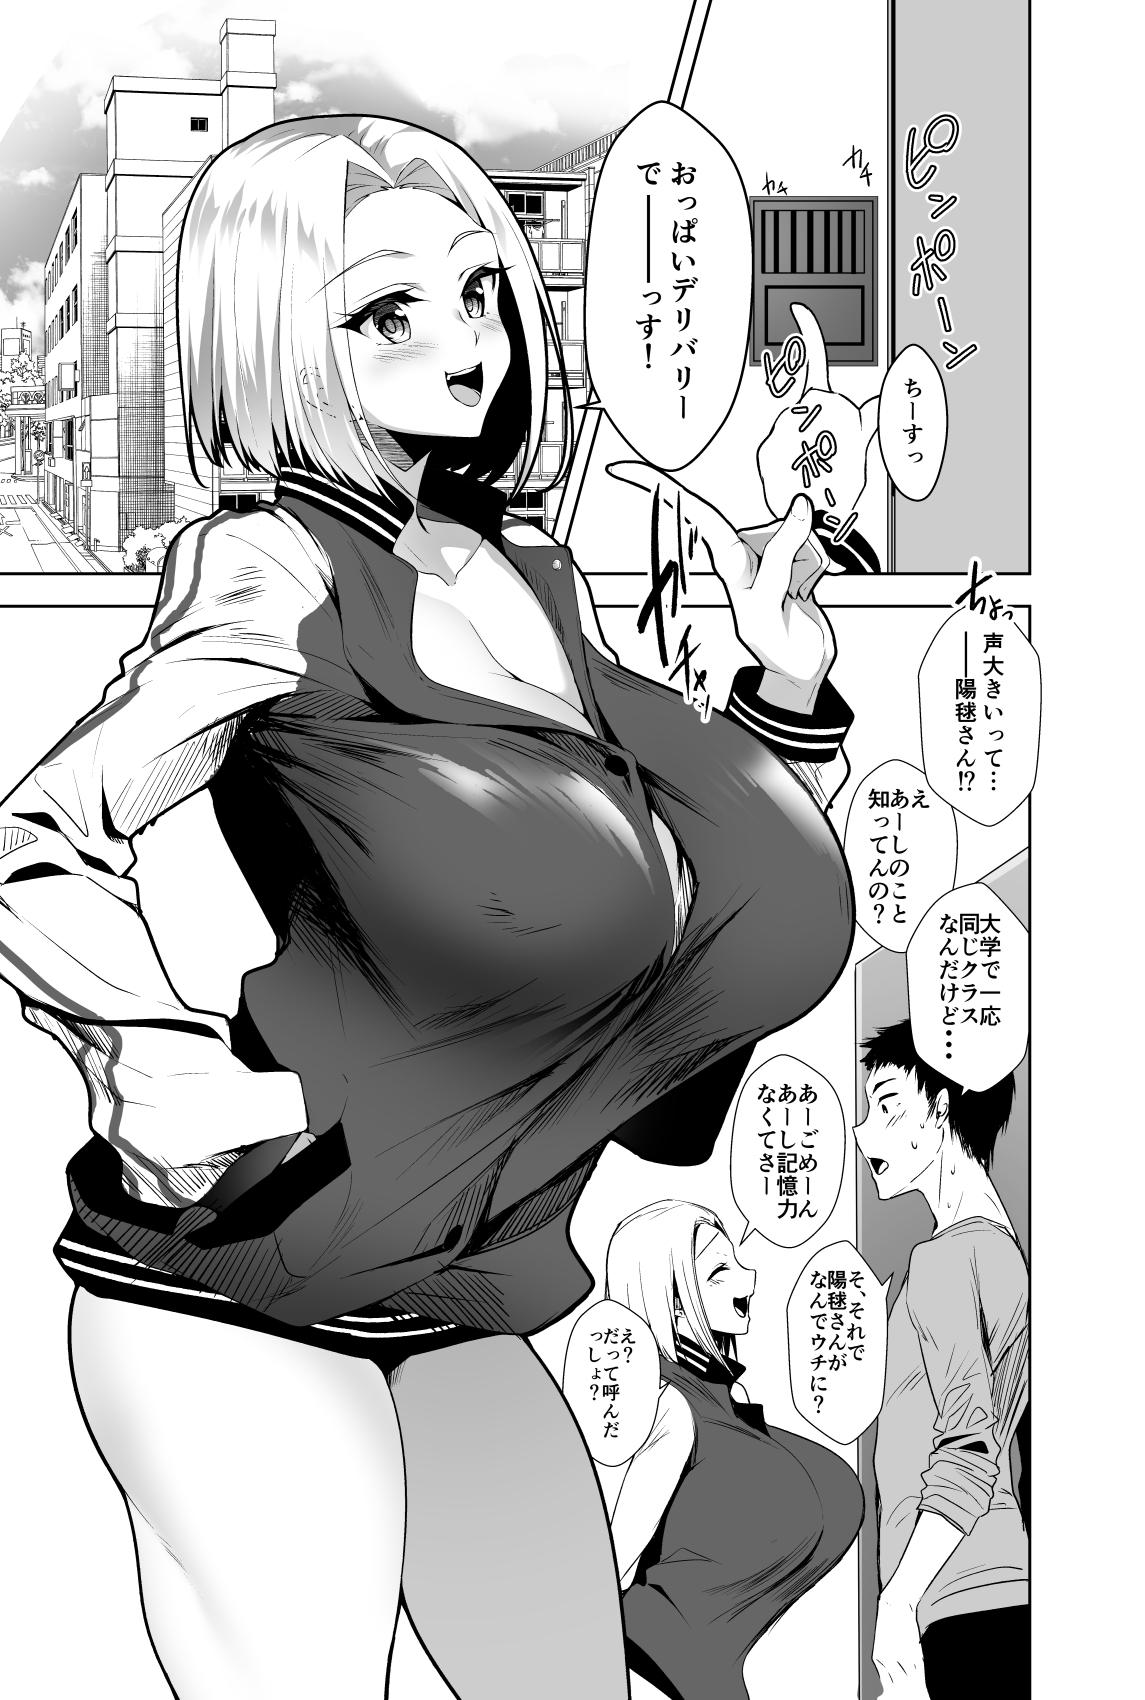 Tites Oppai Delivery - Original Milfs - Page 2